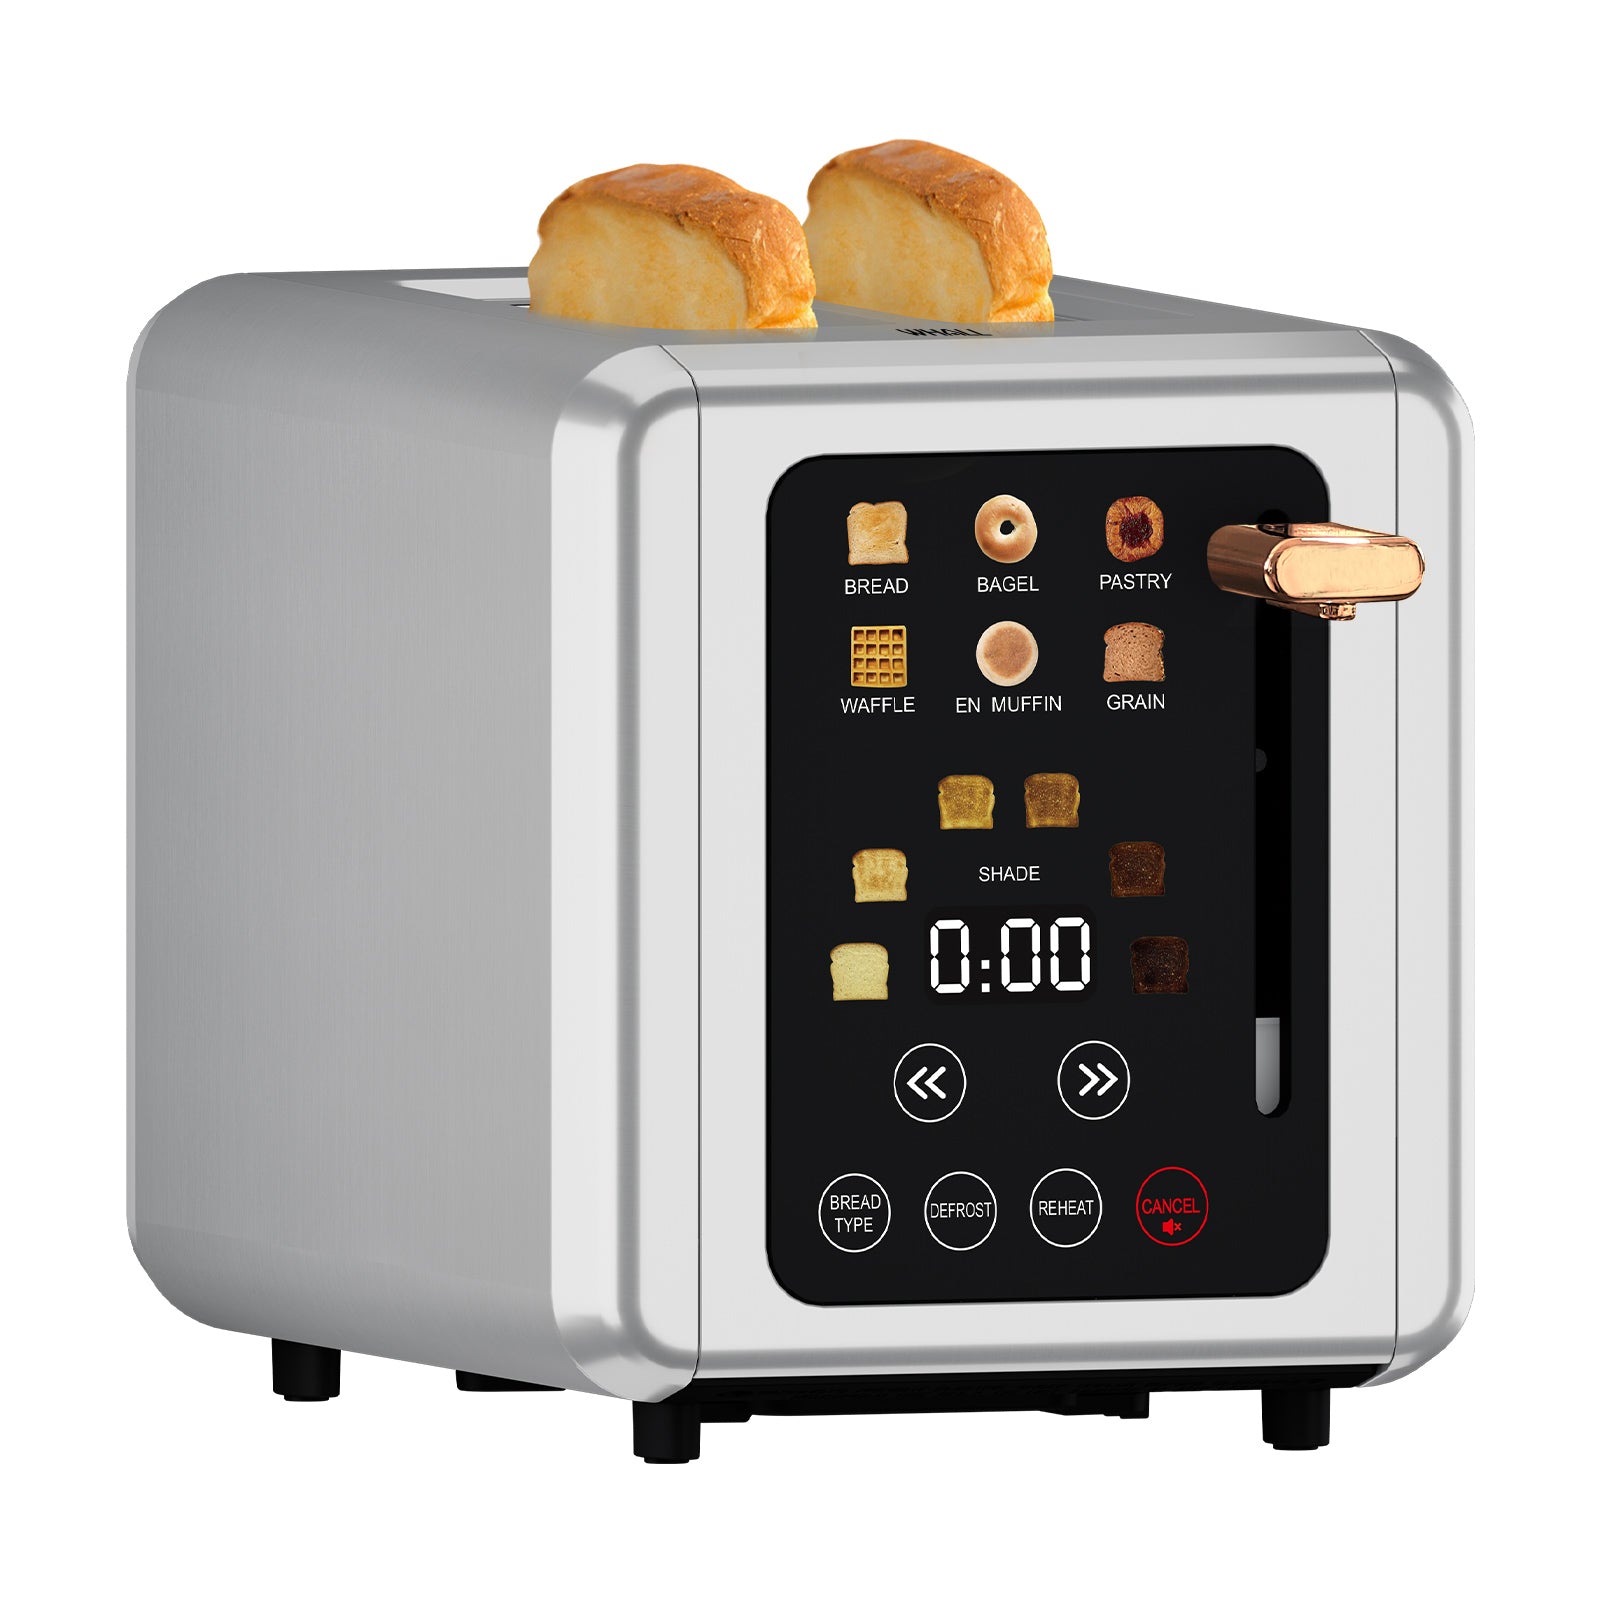 WHALL® Touch Screen Toaster 2 Slice, Stainless Steel Digital Timer Toaster, 6 Bread Types & 6 Shade Settings, Smart Extra Wide Slots Toaster With Bagel, Cancel, Defrost Functions，Gold Lever